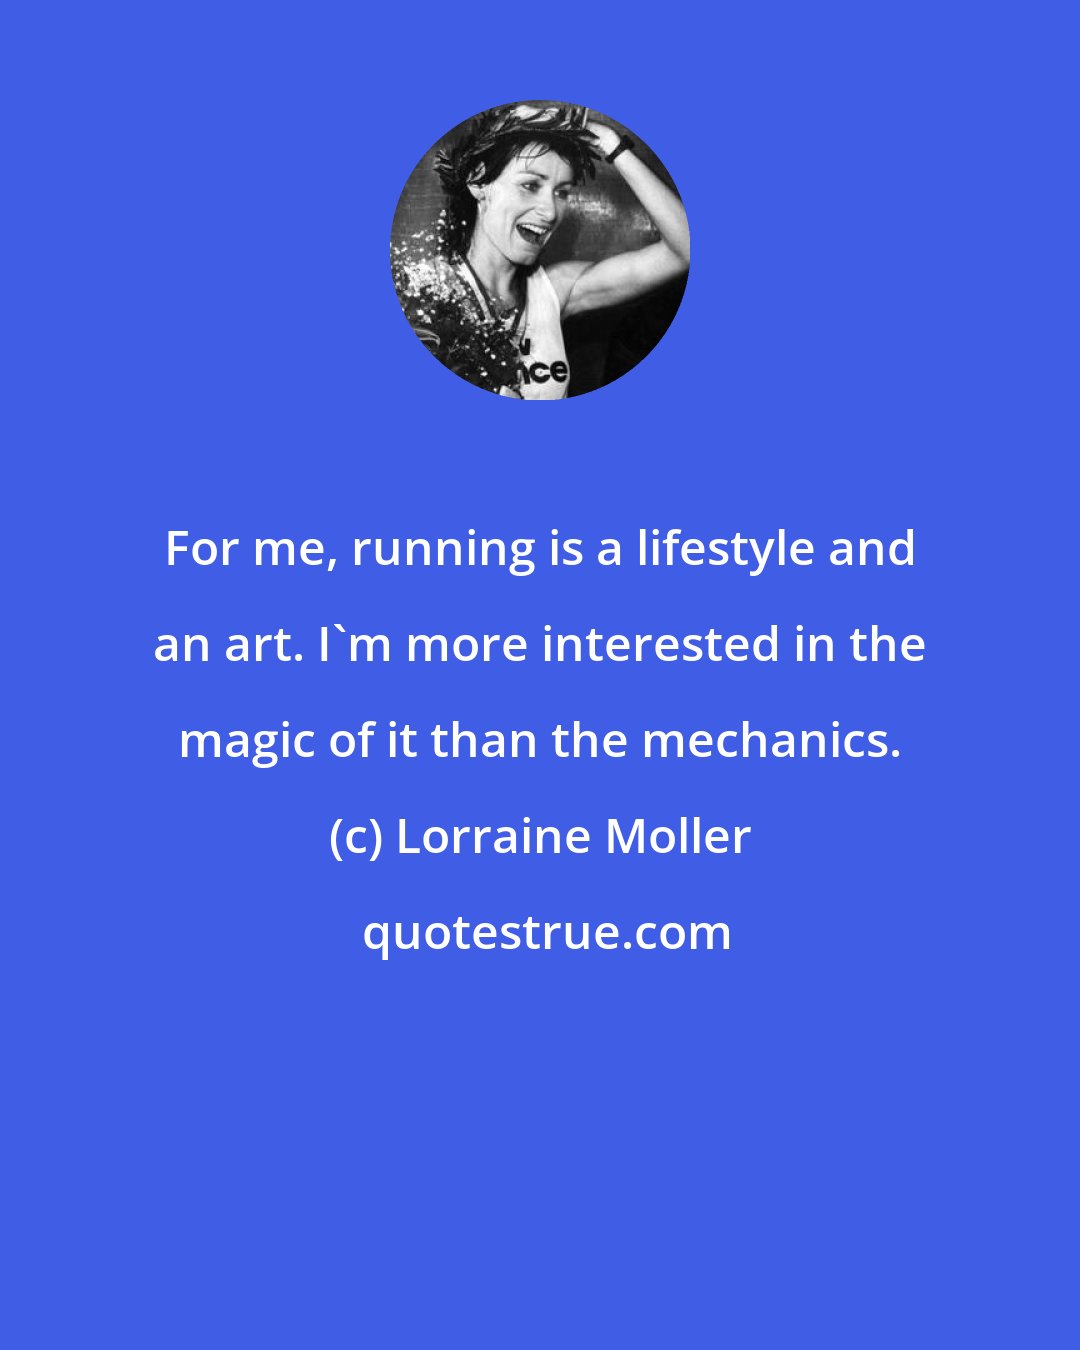 Lorraine Moller: For me, running is a lifestyle and an art. I'm more interested in the magic of it than the mechanics.